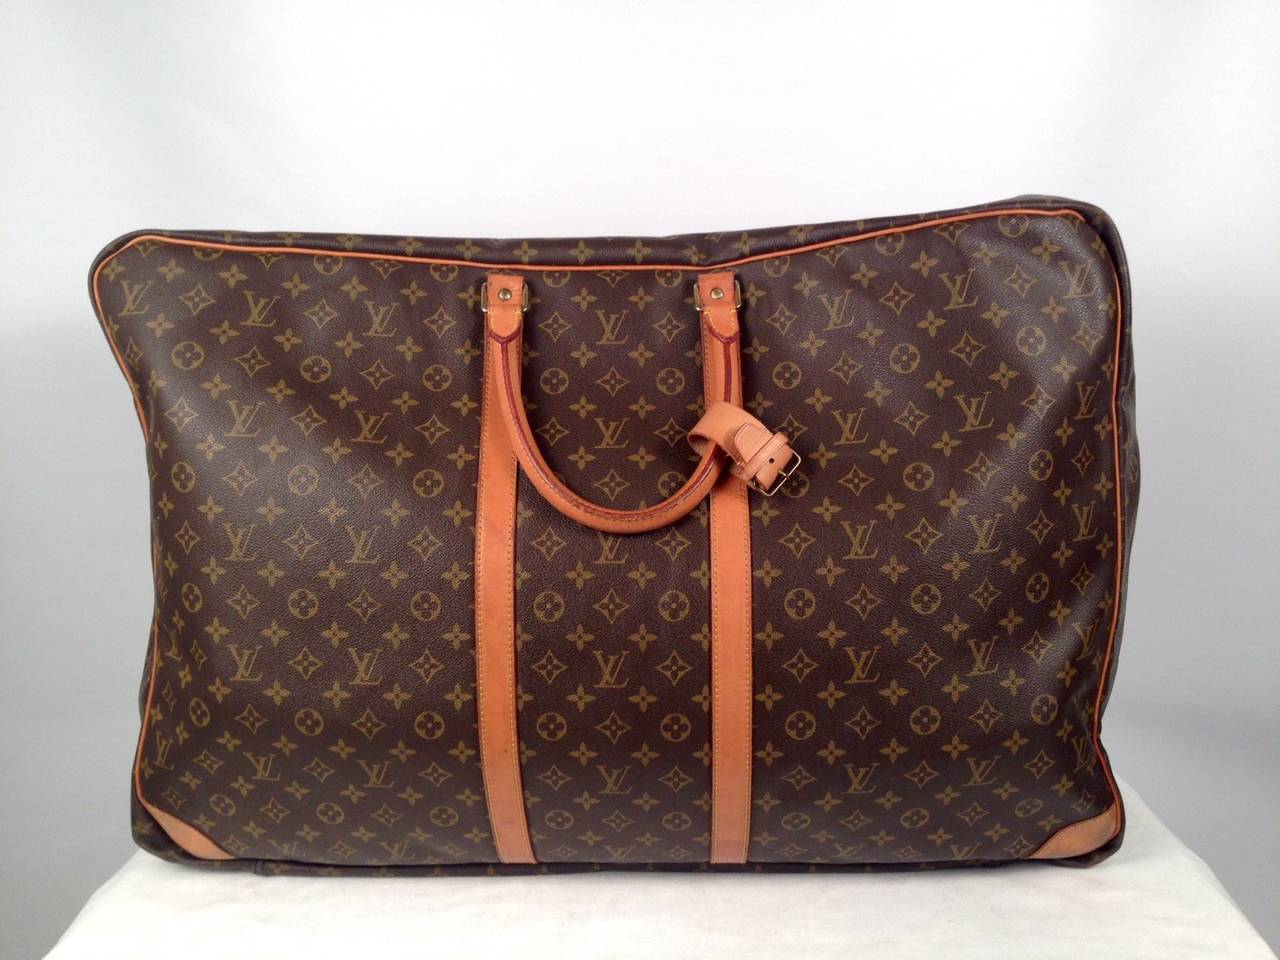 This Louis Vuitton Monogram Canvas Sirius 70 single compartment soft suitcase is the largest member of the Sirius family and will fit in the overhead cabin. This soft suitcase is constructed from Louis Vuitton's trademark, super-durable Monogram